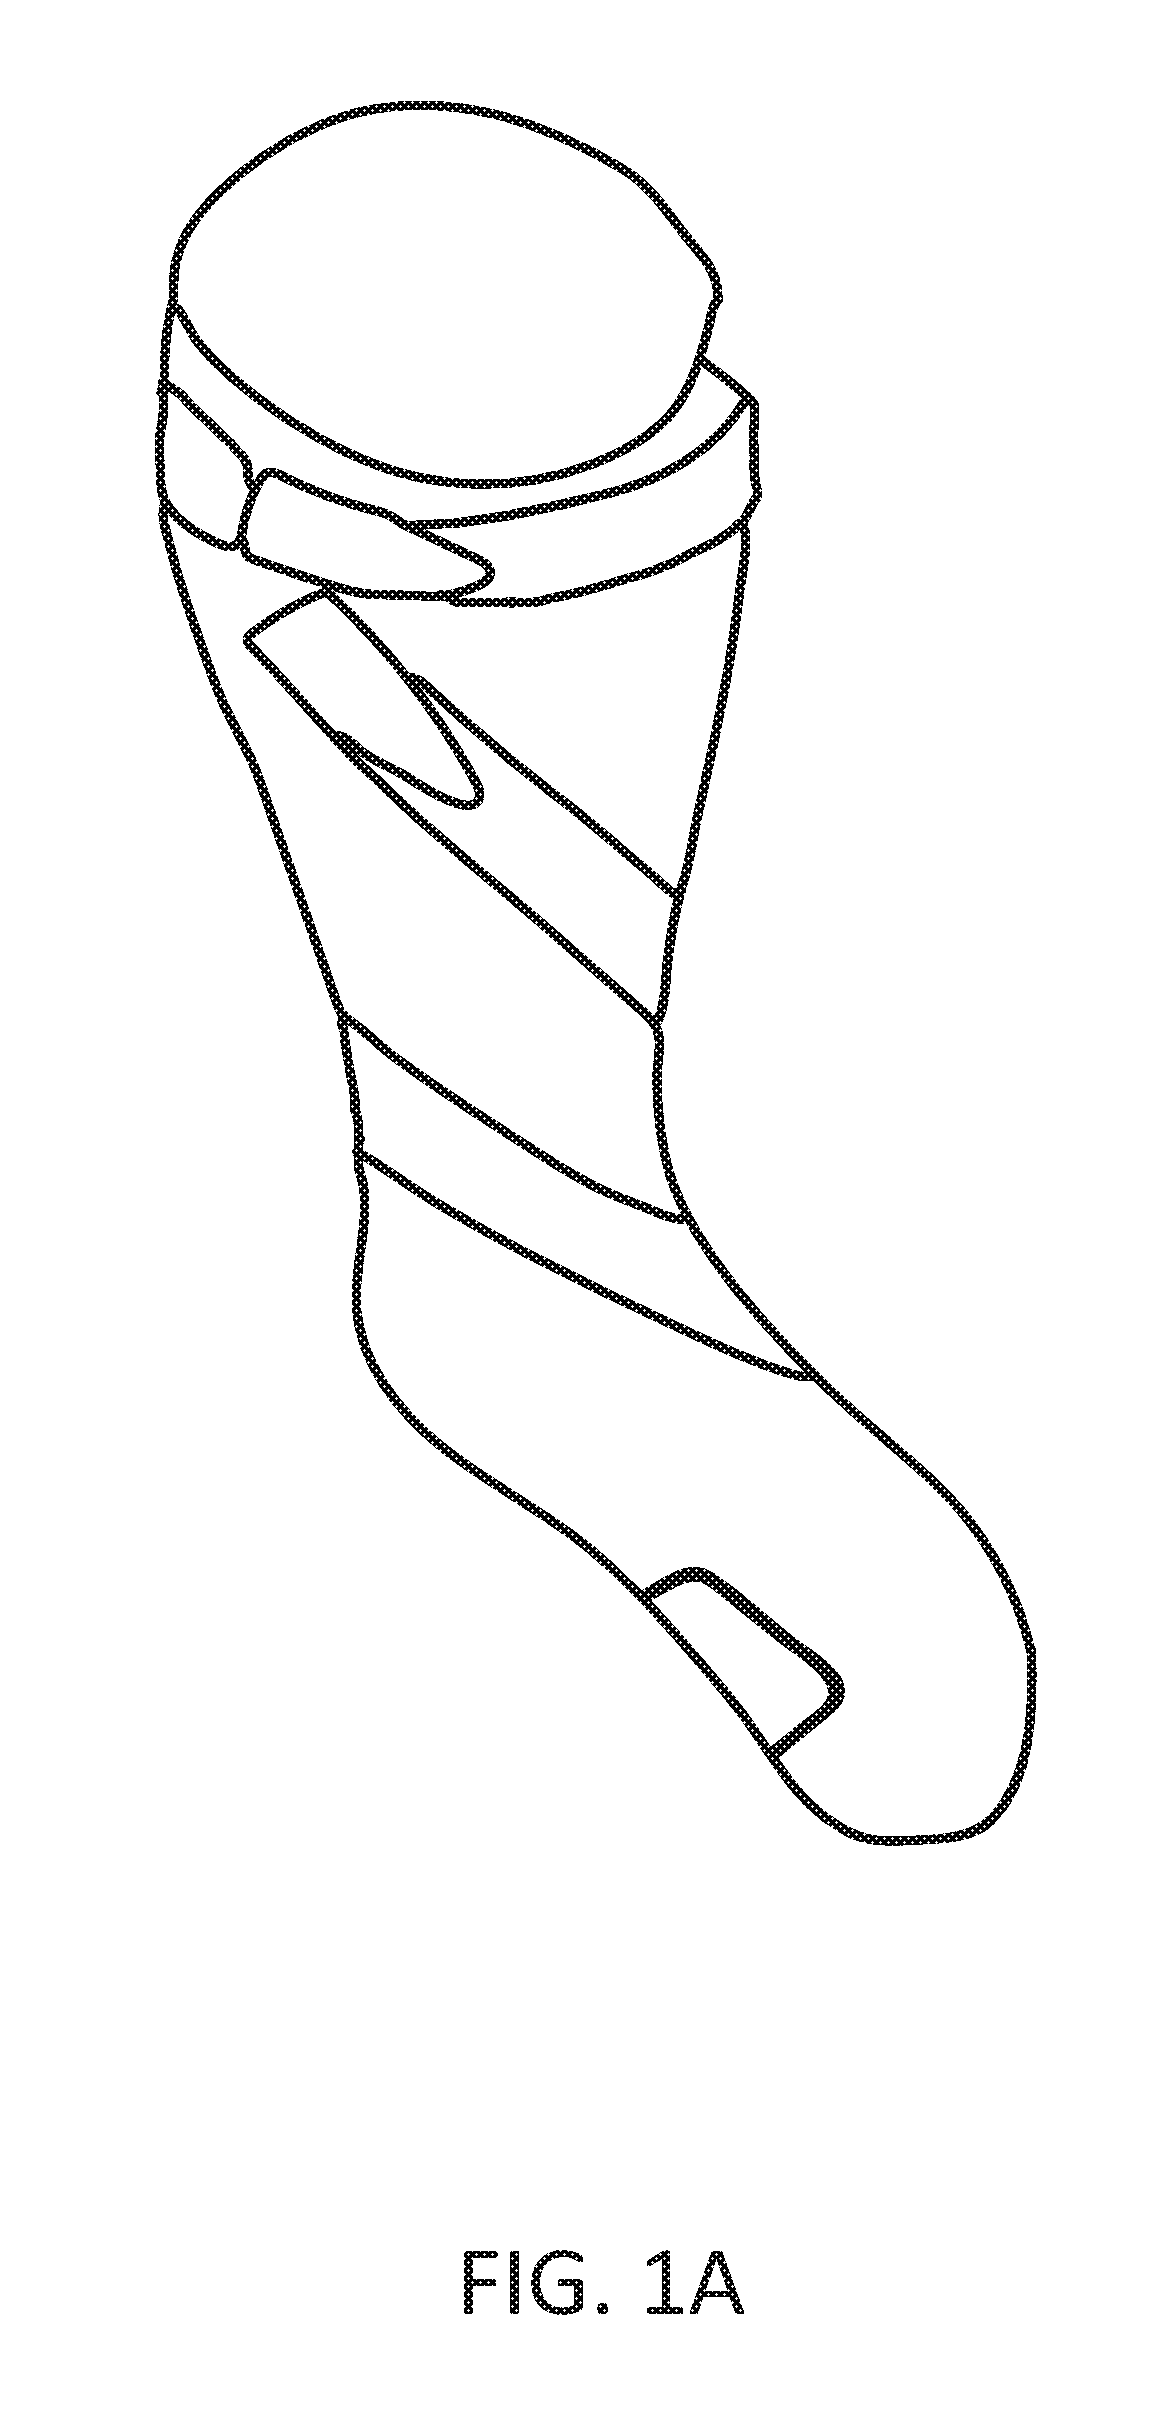 Methods and apparatus for human anatomical orthoses